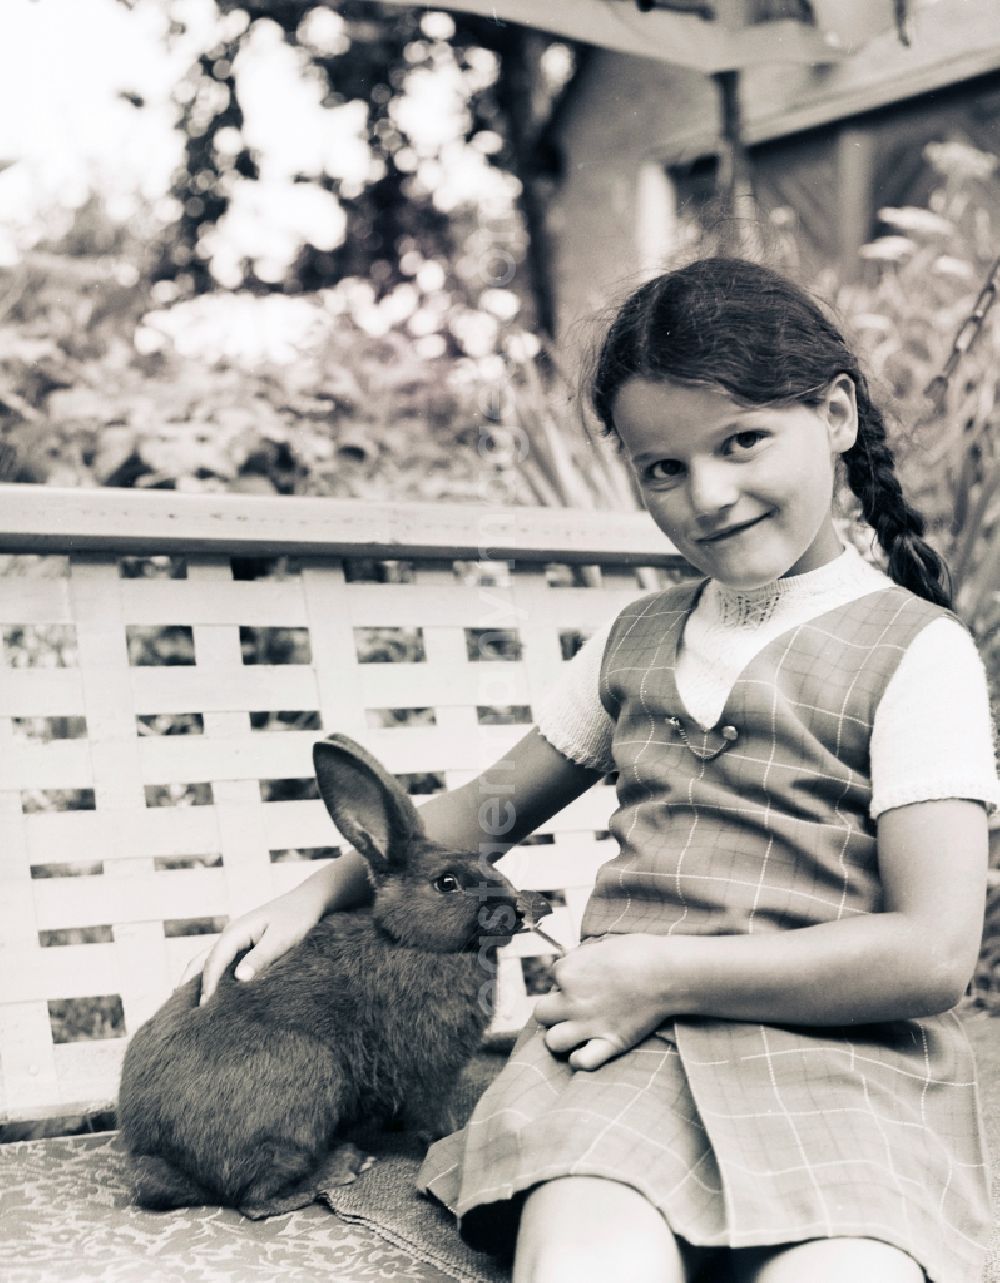 GDR photo archive: Scheibenberg - Girl sits with a rabbit of a garden swing in Scheibenberg in the federal state Saxony in the area of the former GDR, German democratic republic